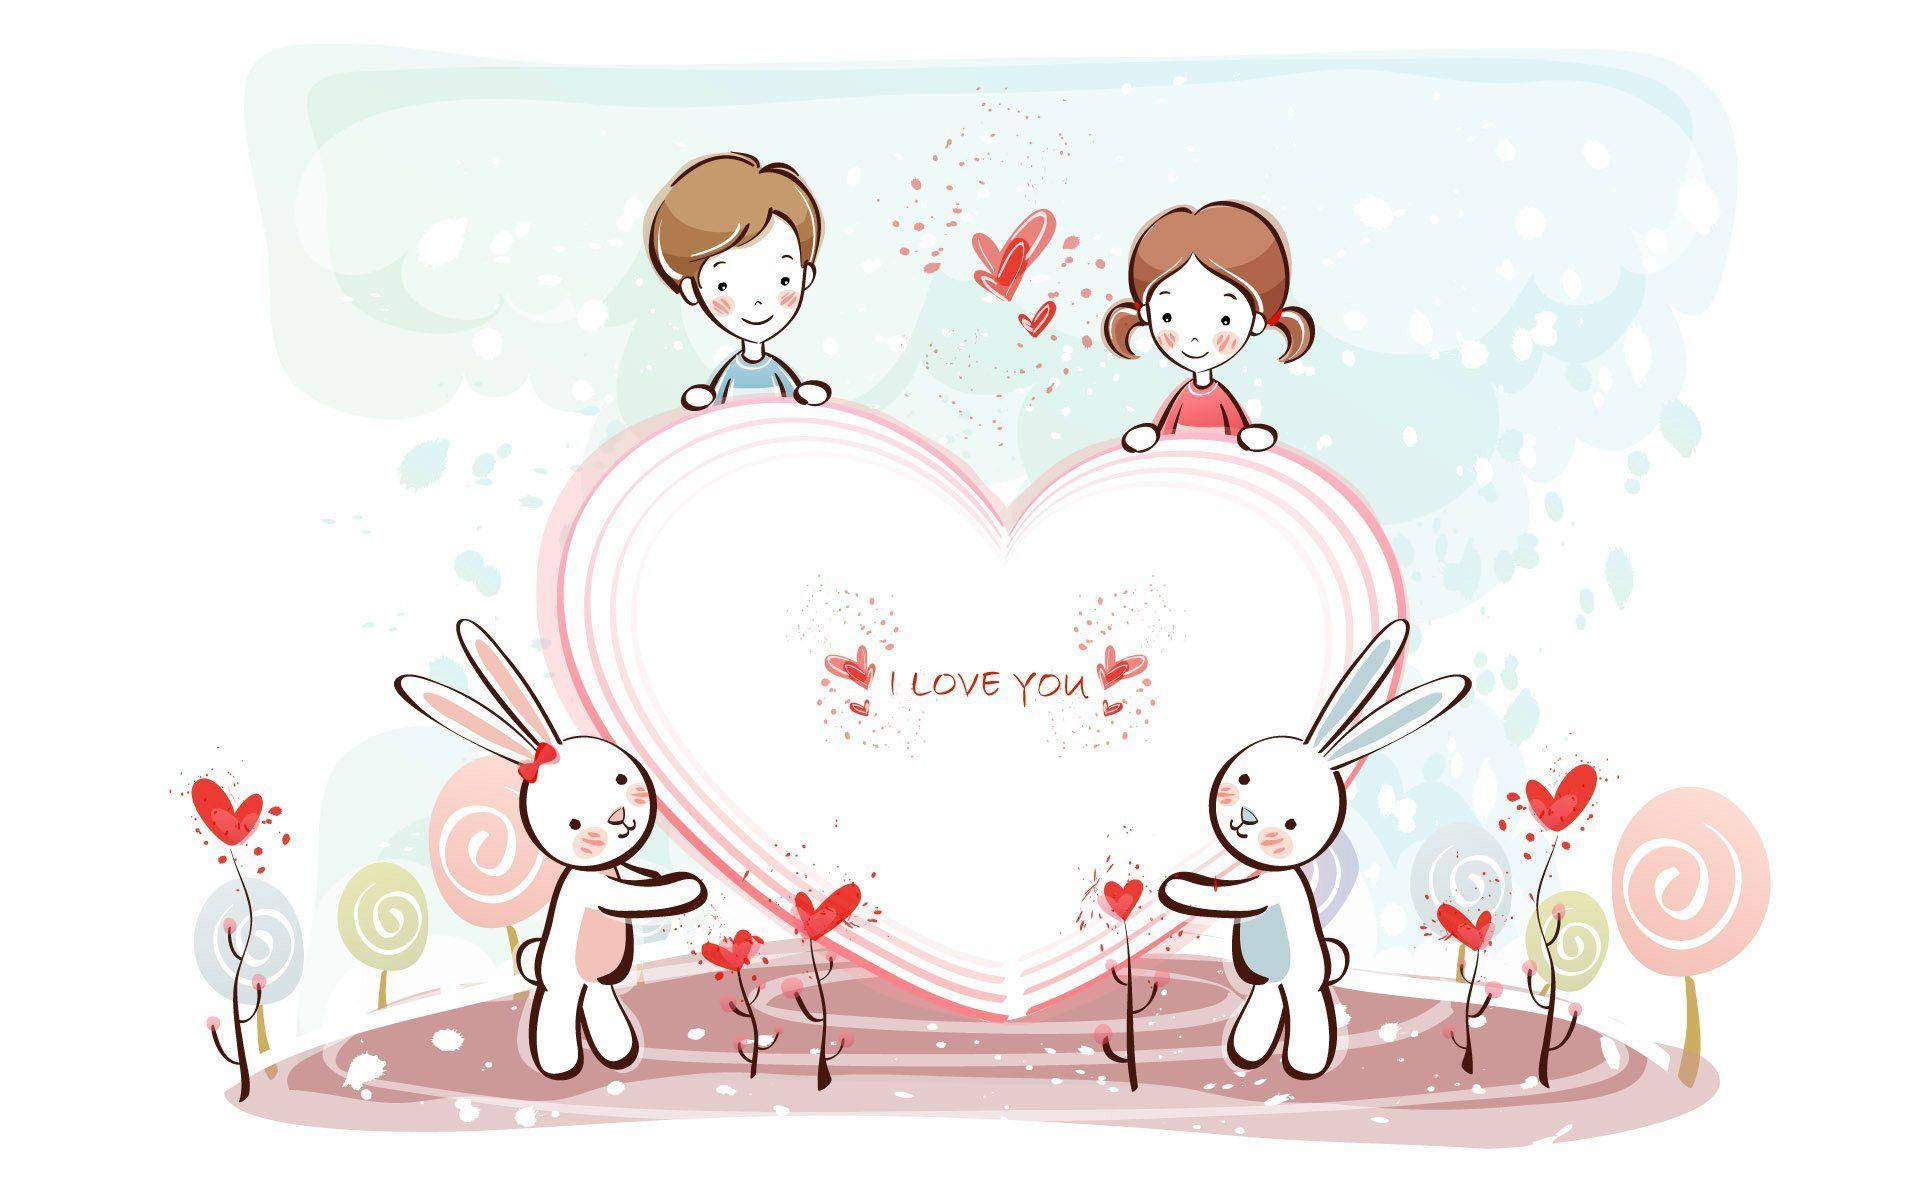 Free Cute Love Wallpaper Downloads, [100+] Cute Love Wallpapers for FREE |  